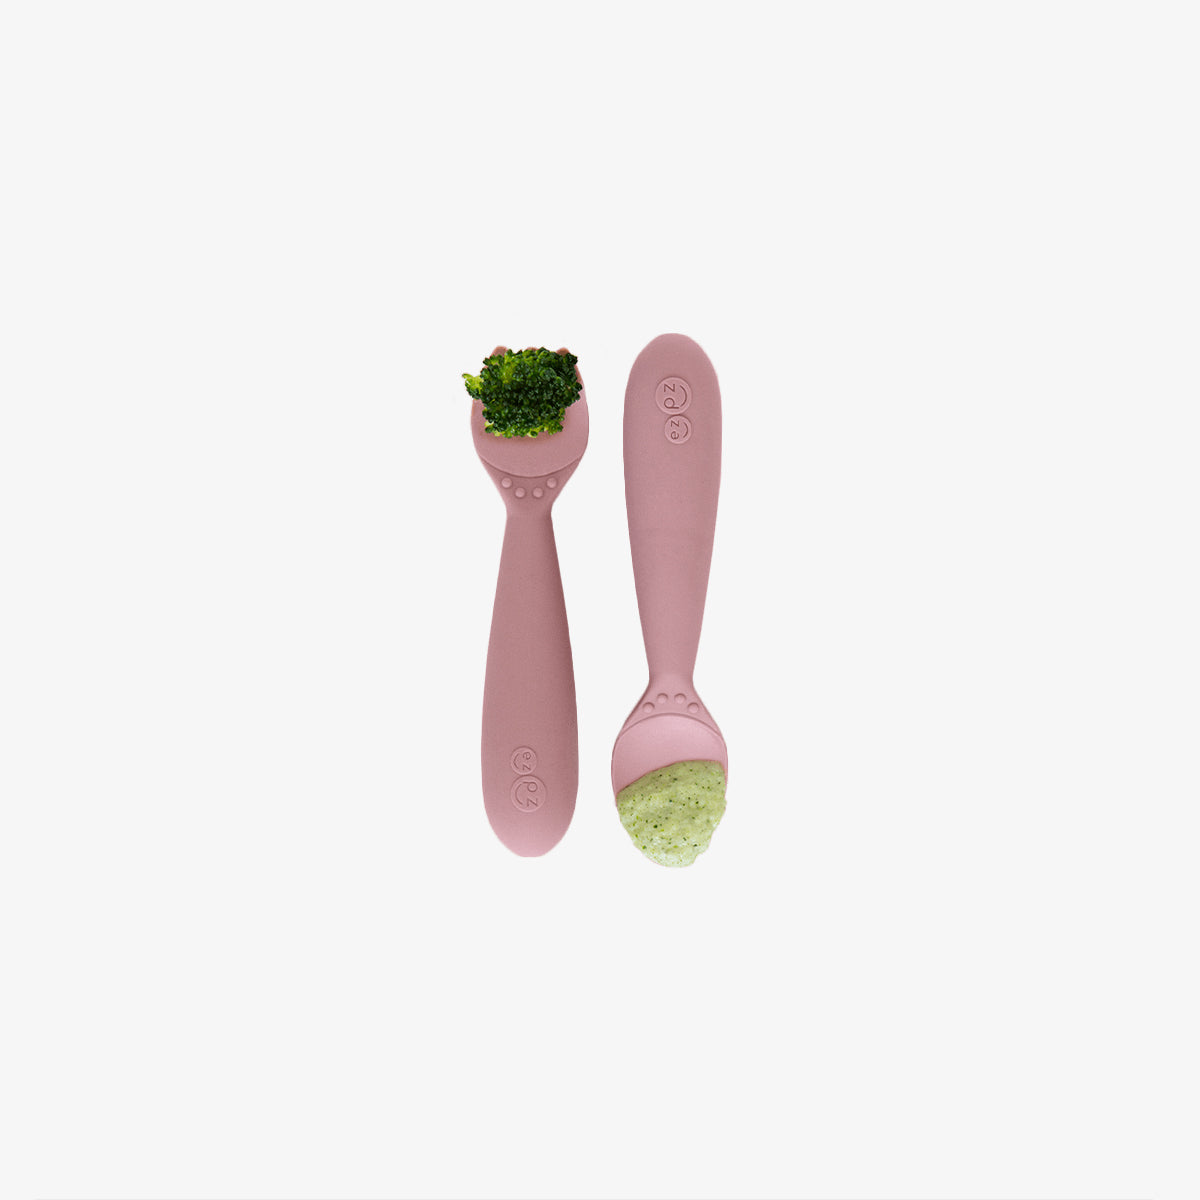 Mini Utensils in Blush by ezpz / Sensory Silicone Fork & Spoon for Toddlers